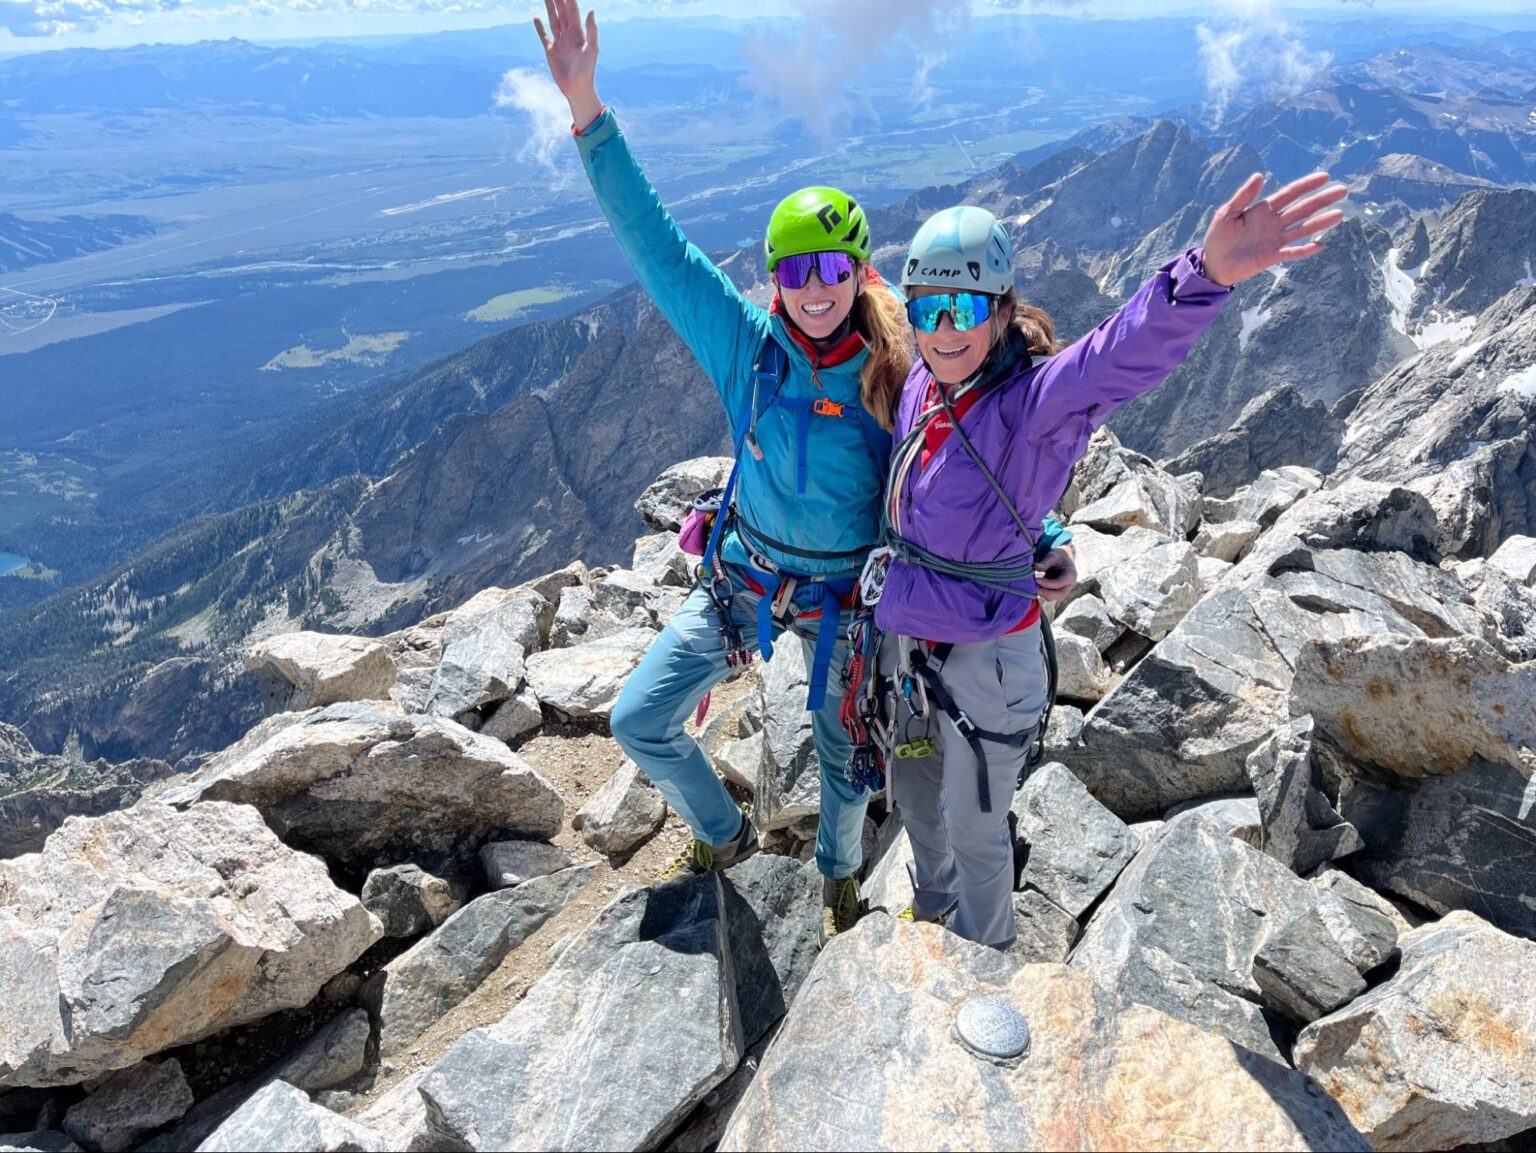 Two women climbers on a rocky mountain summit